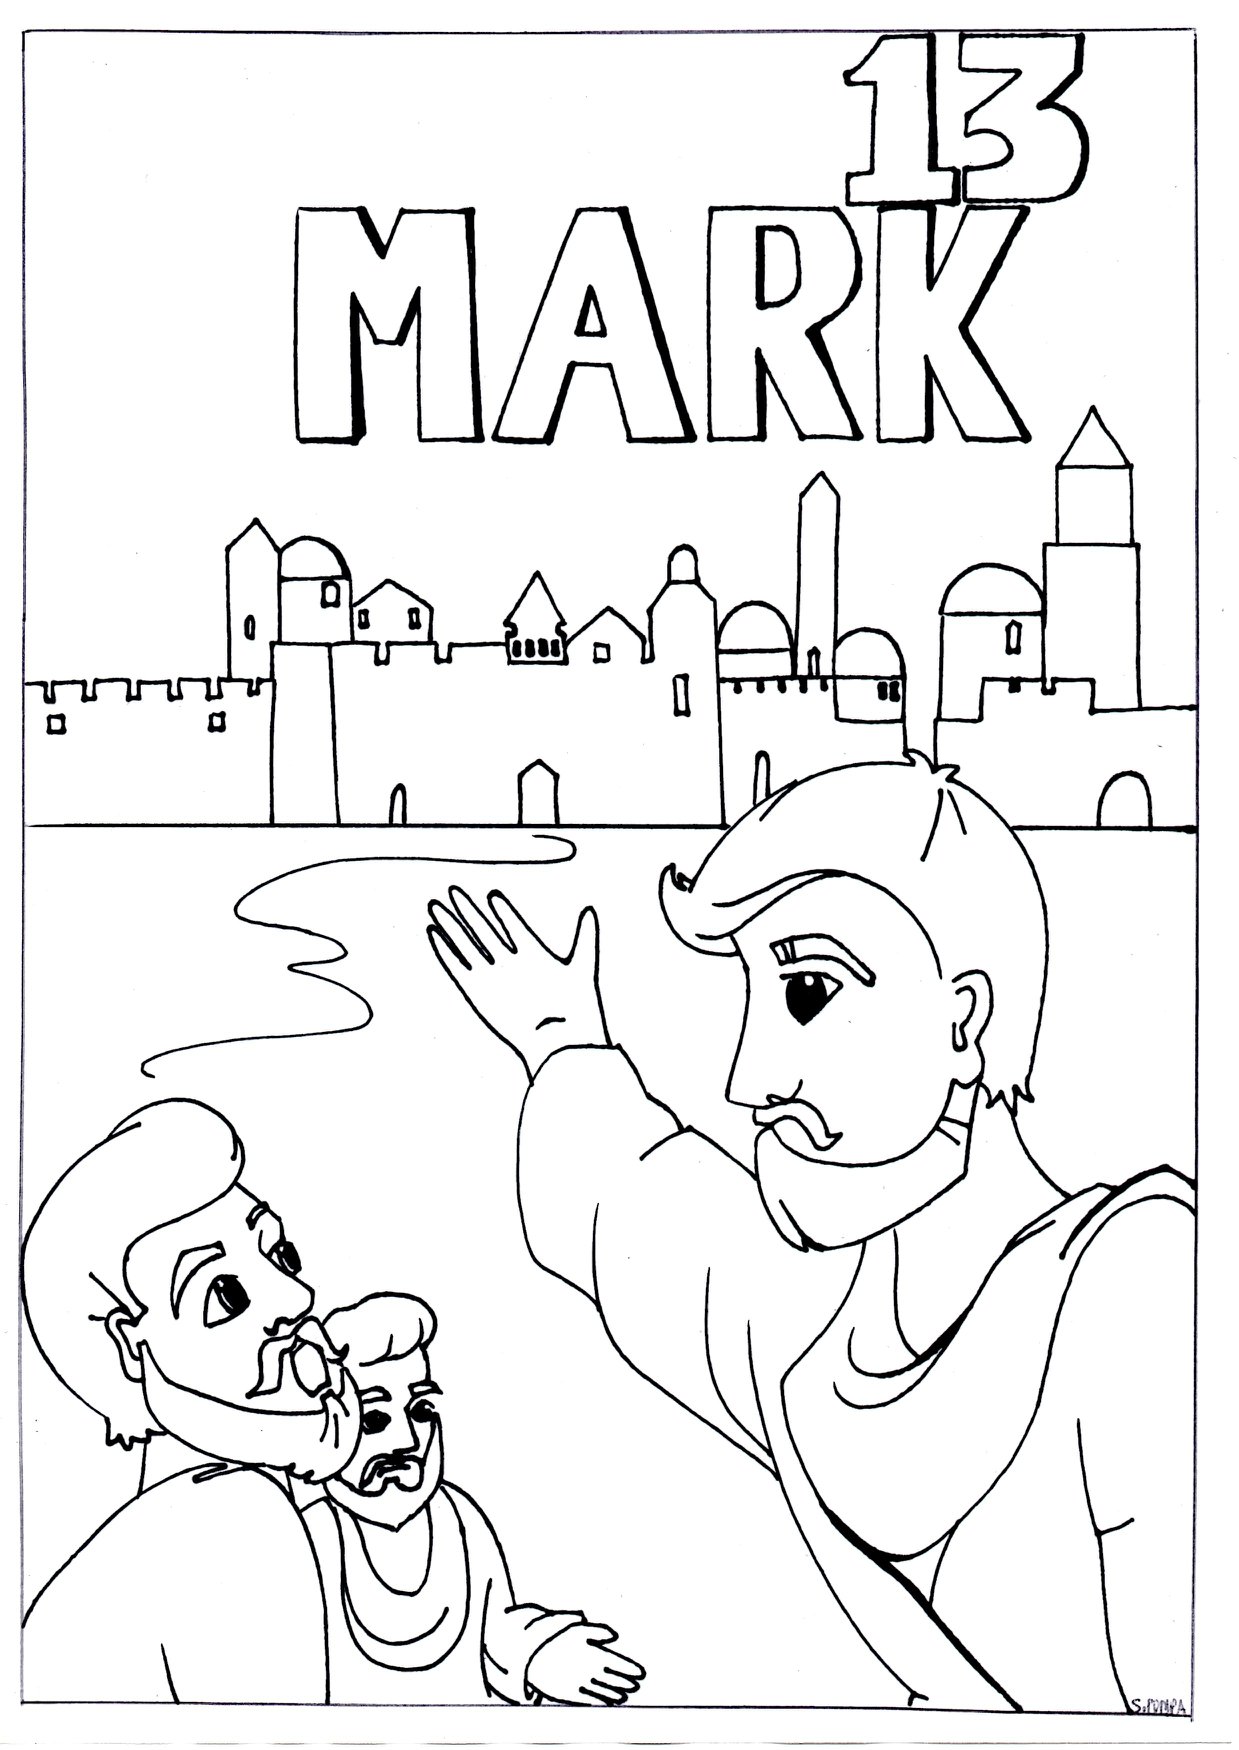 Here's a page for kids to colour in during the online sermon tomorrow ...